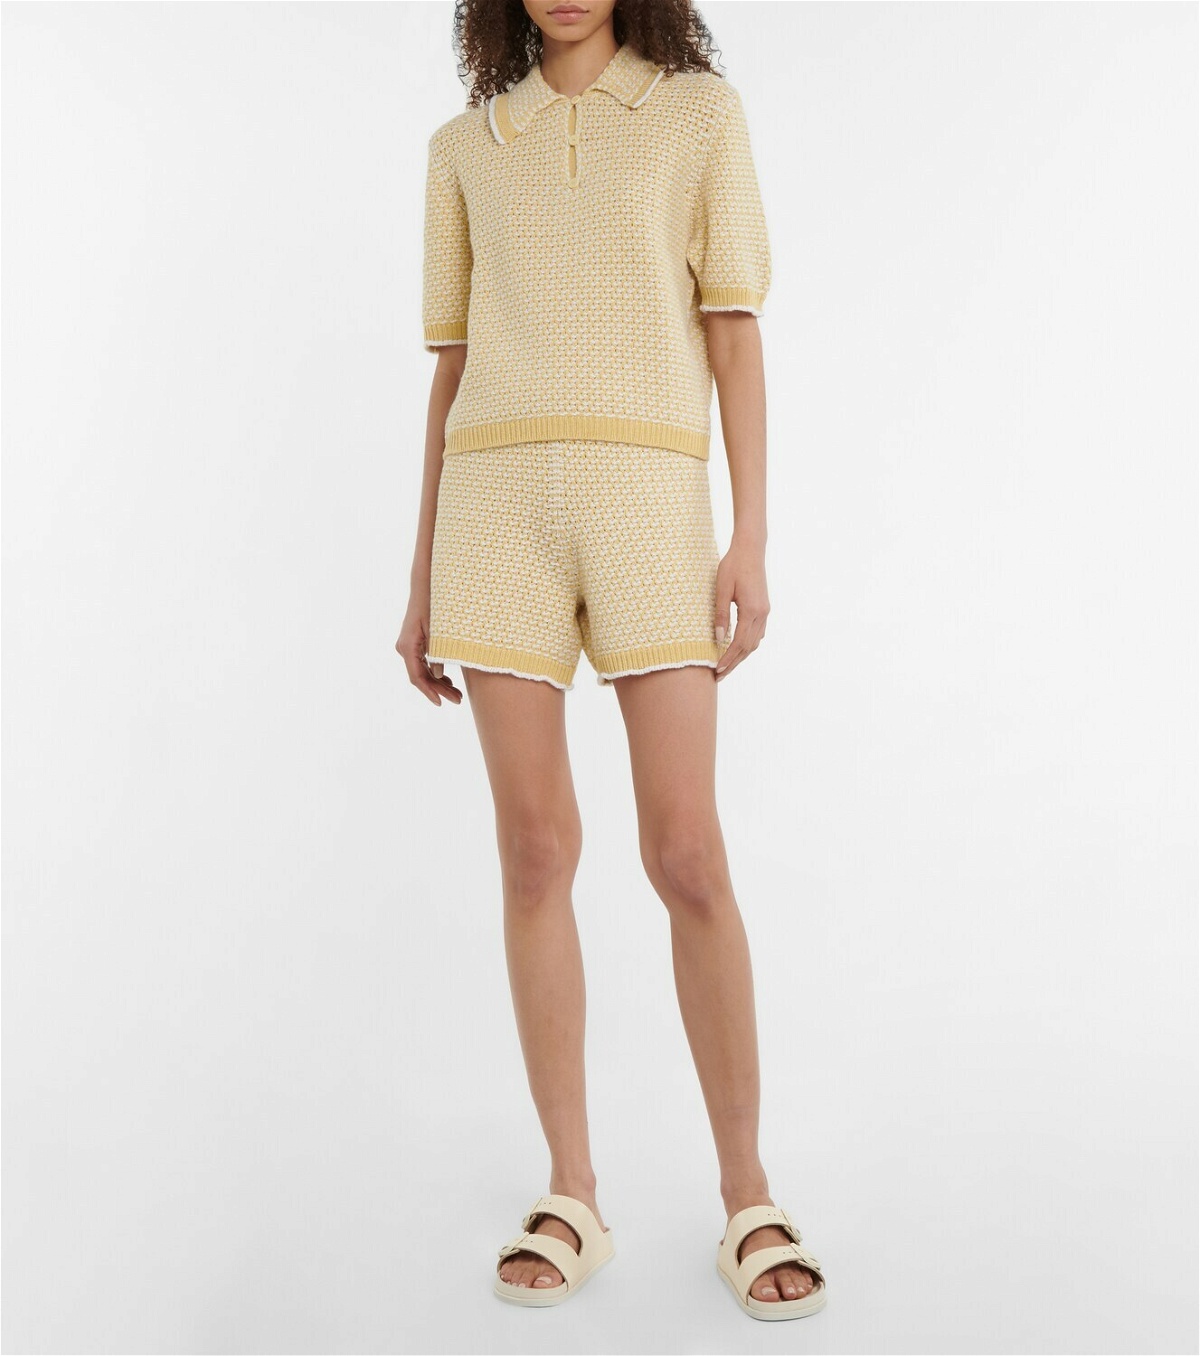 Barrie Cashmere and cotton knit shorts